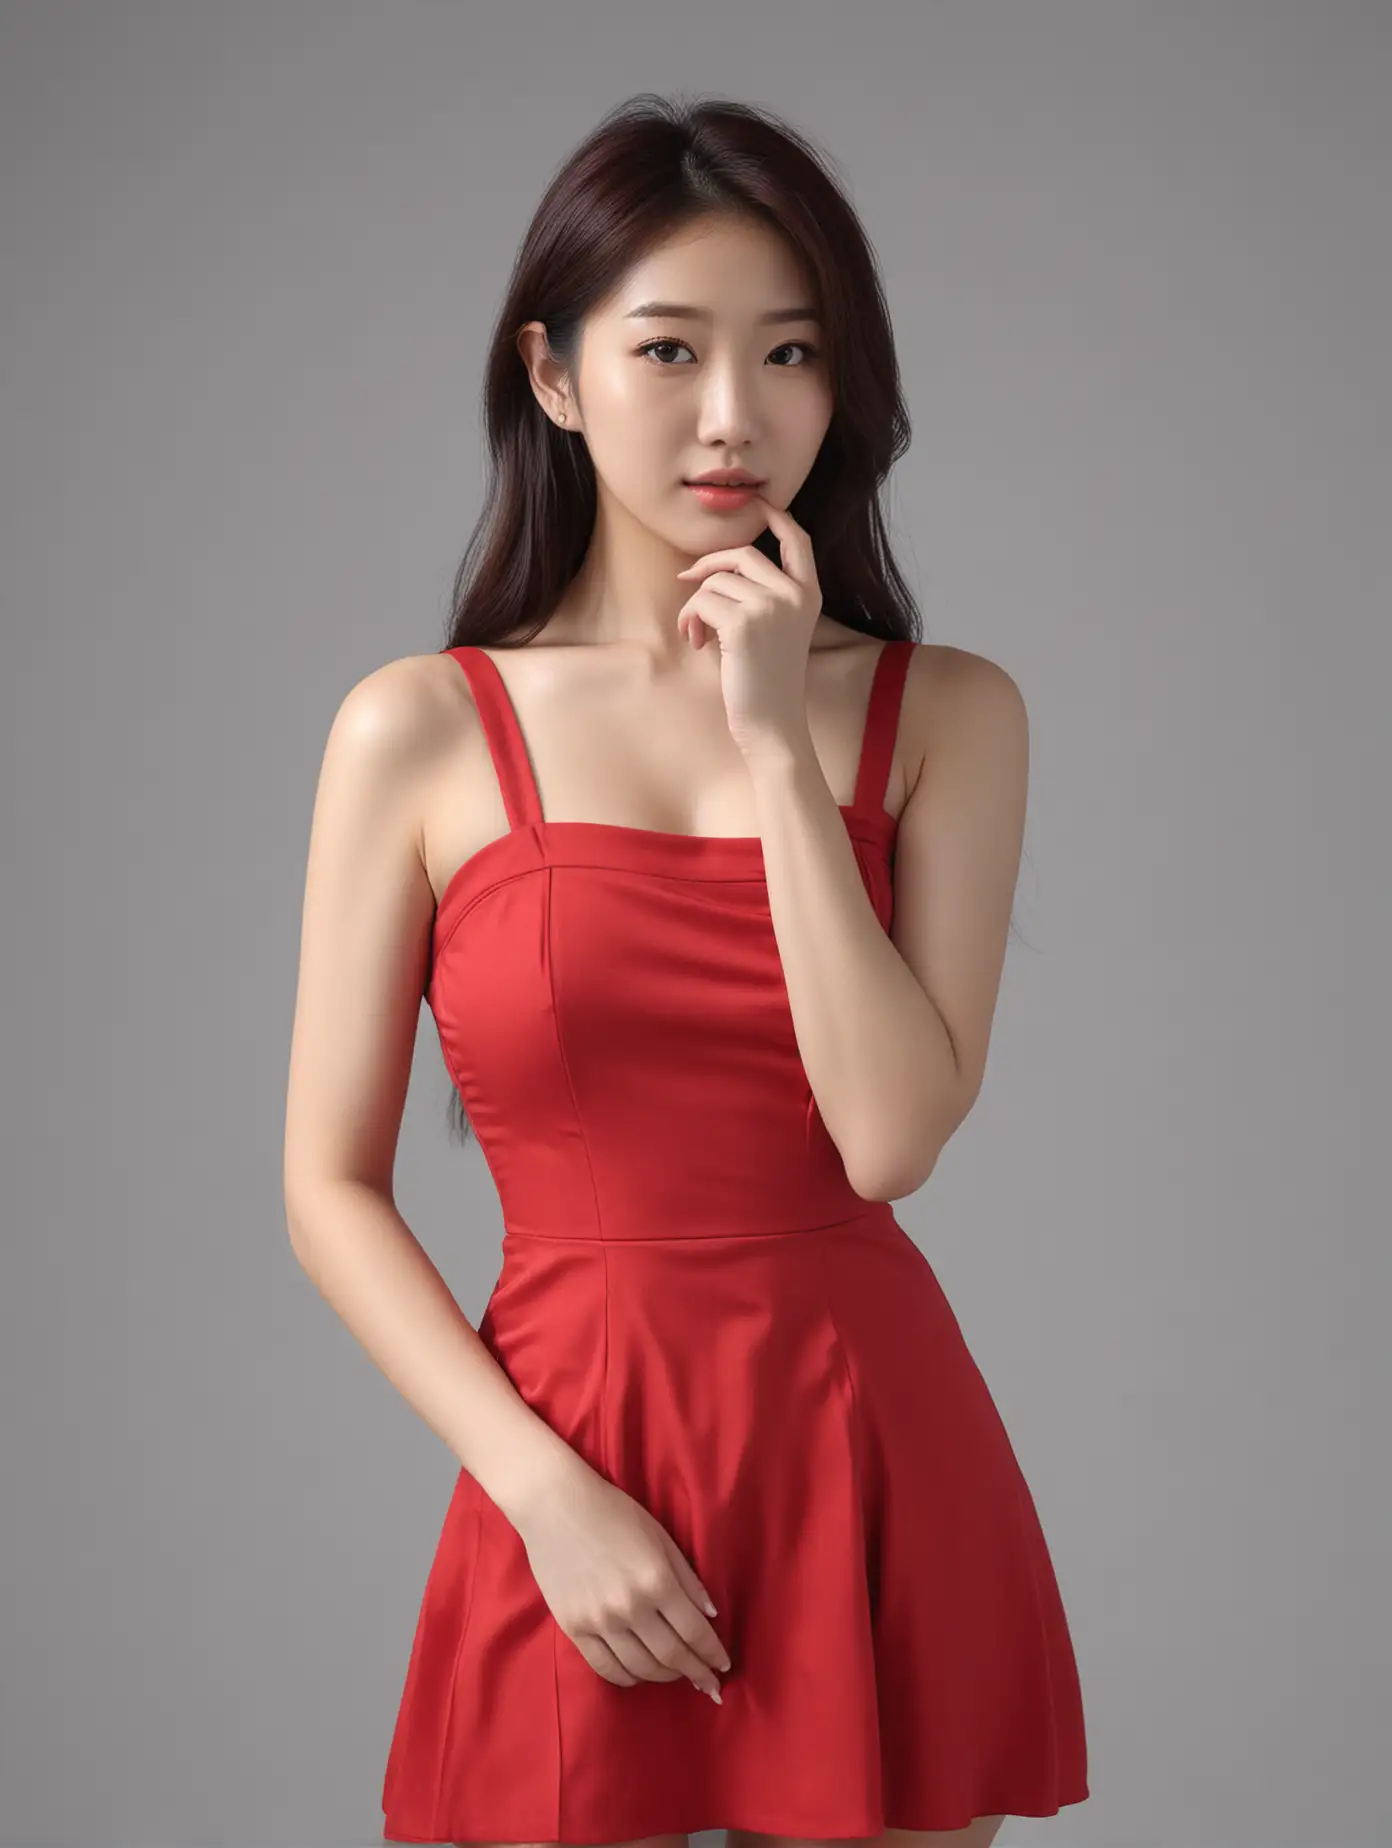 Sultry Korean Woman in Vivid Red Dress on Monochrome Canvas